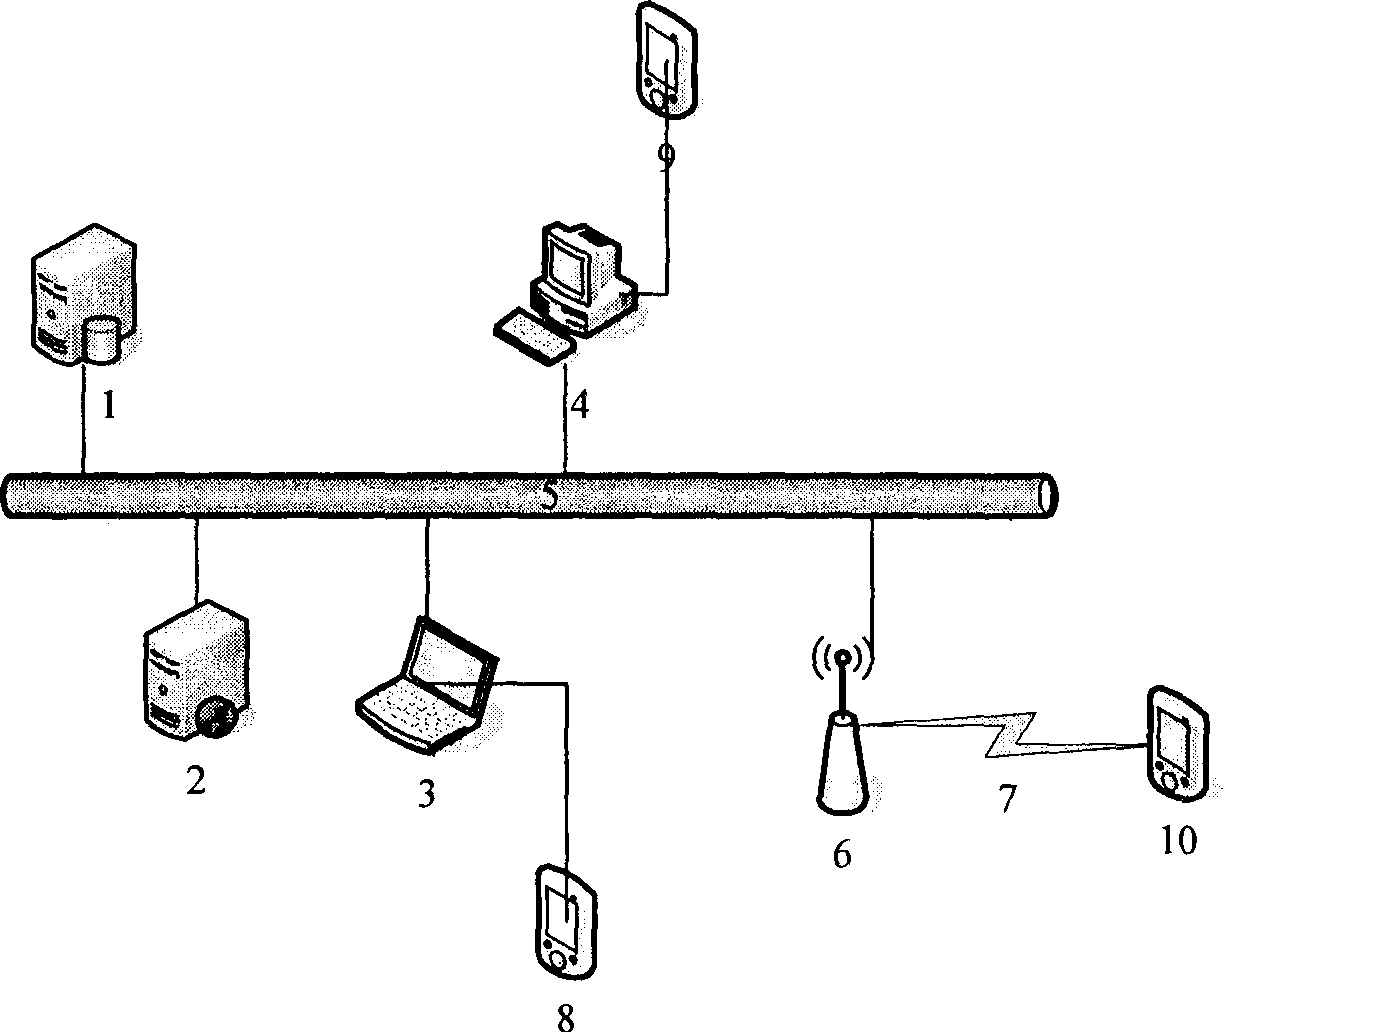 Failure diagnosis system and method based on PDA